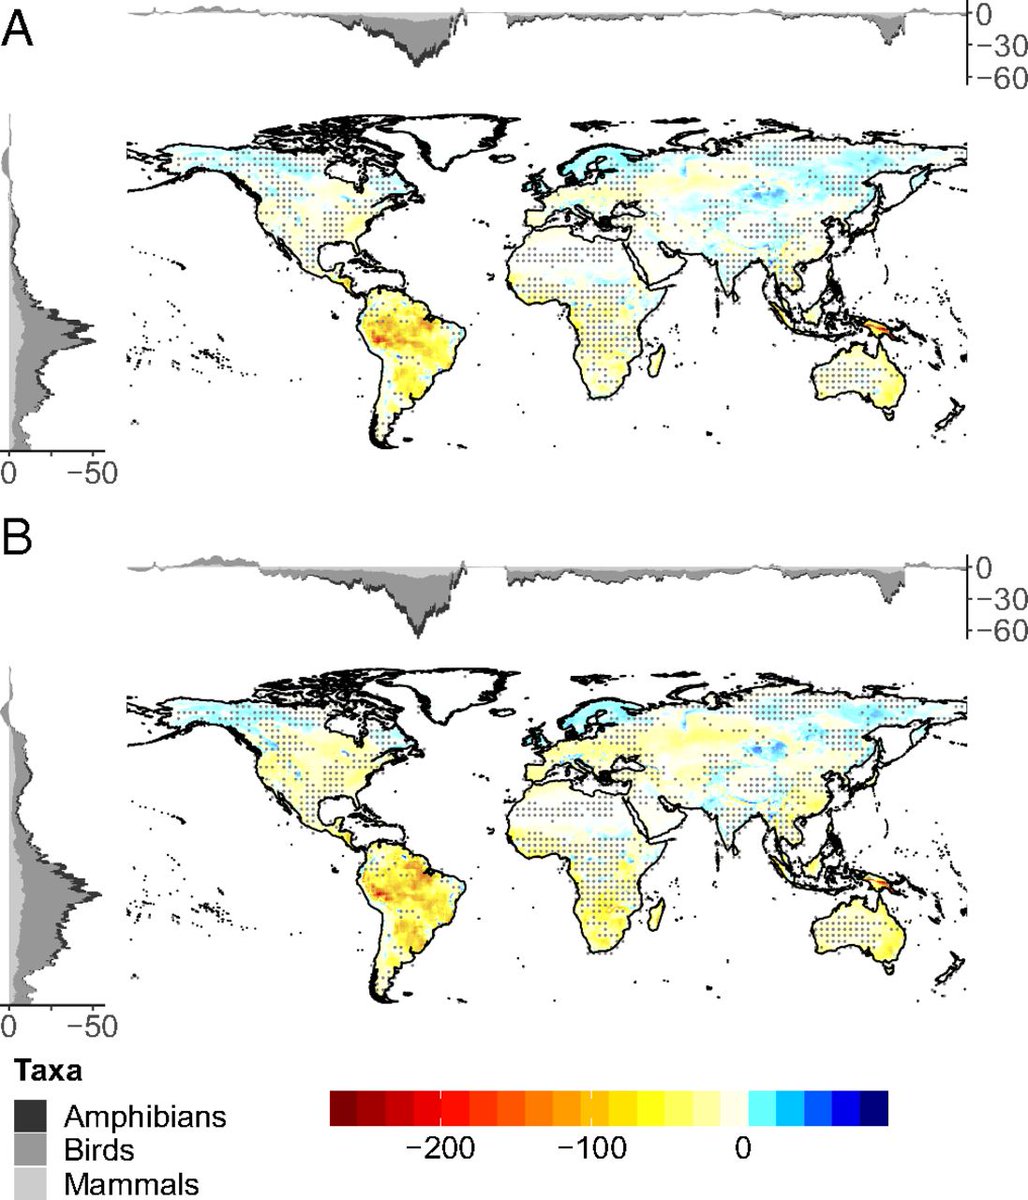 Combined effects of #ClimateChange & #LandUseChange will be most severe on global species richness of vertebrates under a scenario following the #ParisAgreement which aims to limit global warming to 2° or even 1.5°

Just published doi.org/10.1073/pnas.1…

#COP24 #biodiversity2020